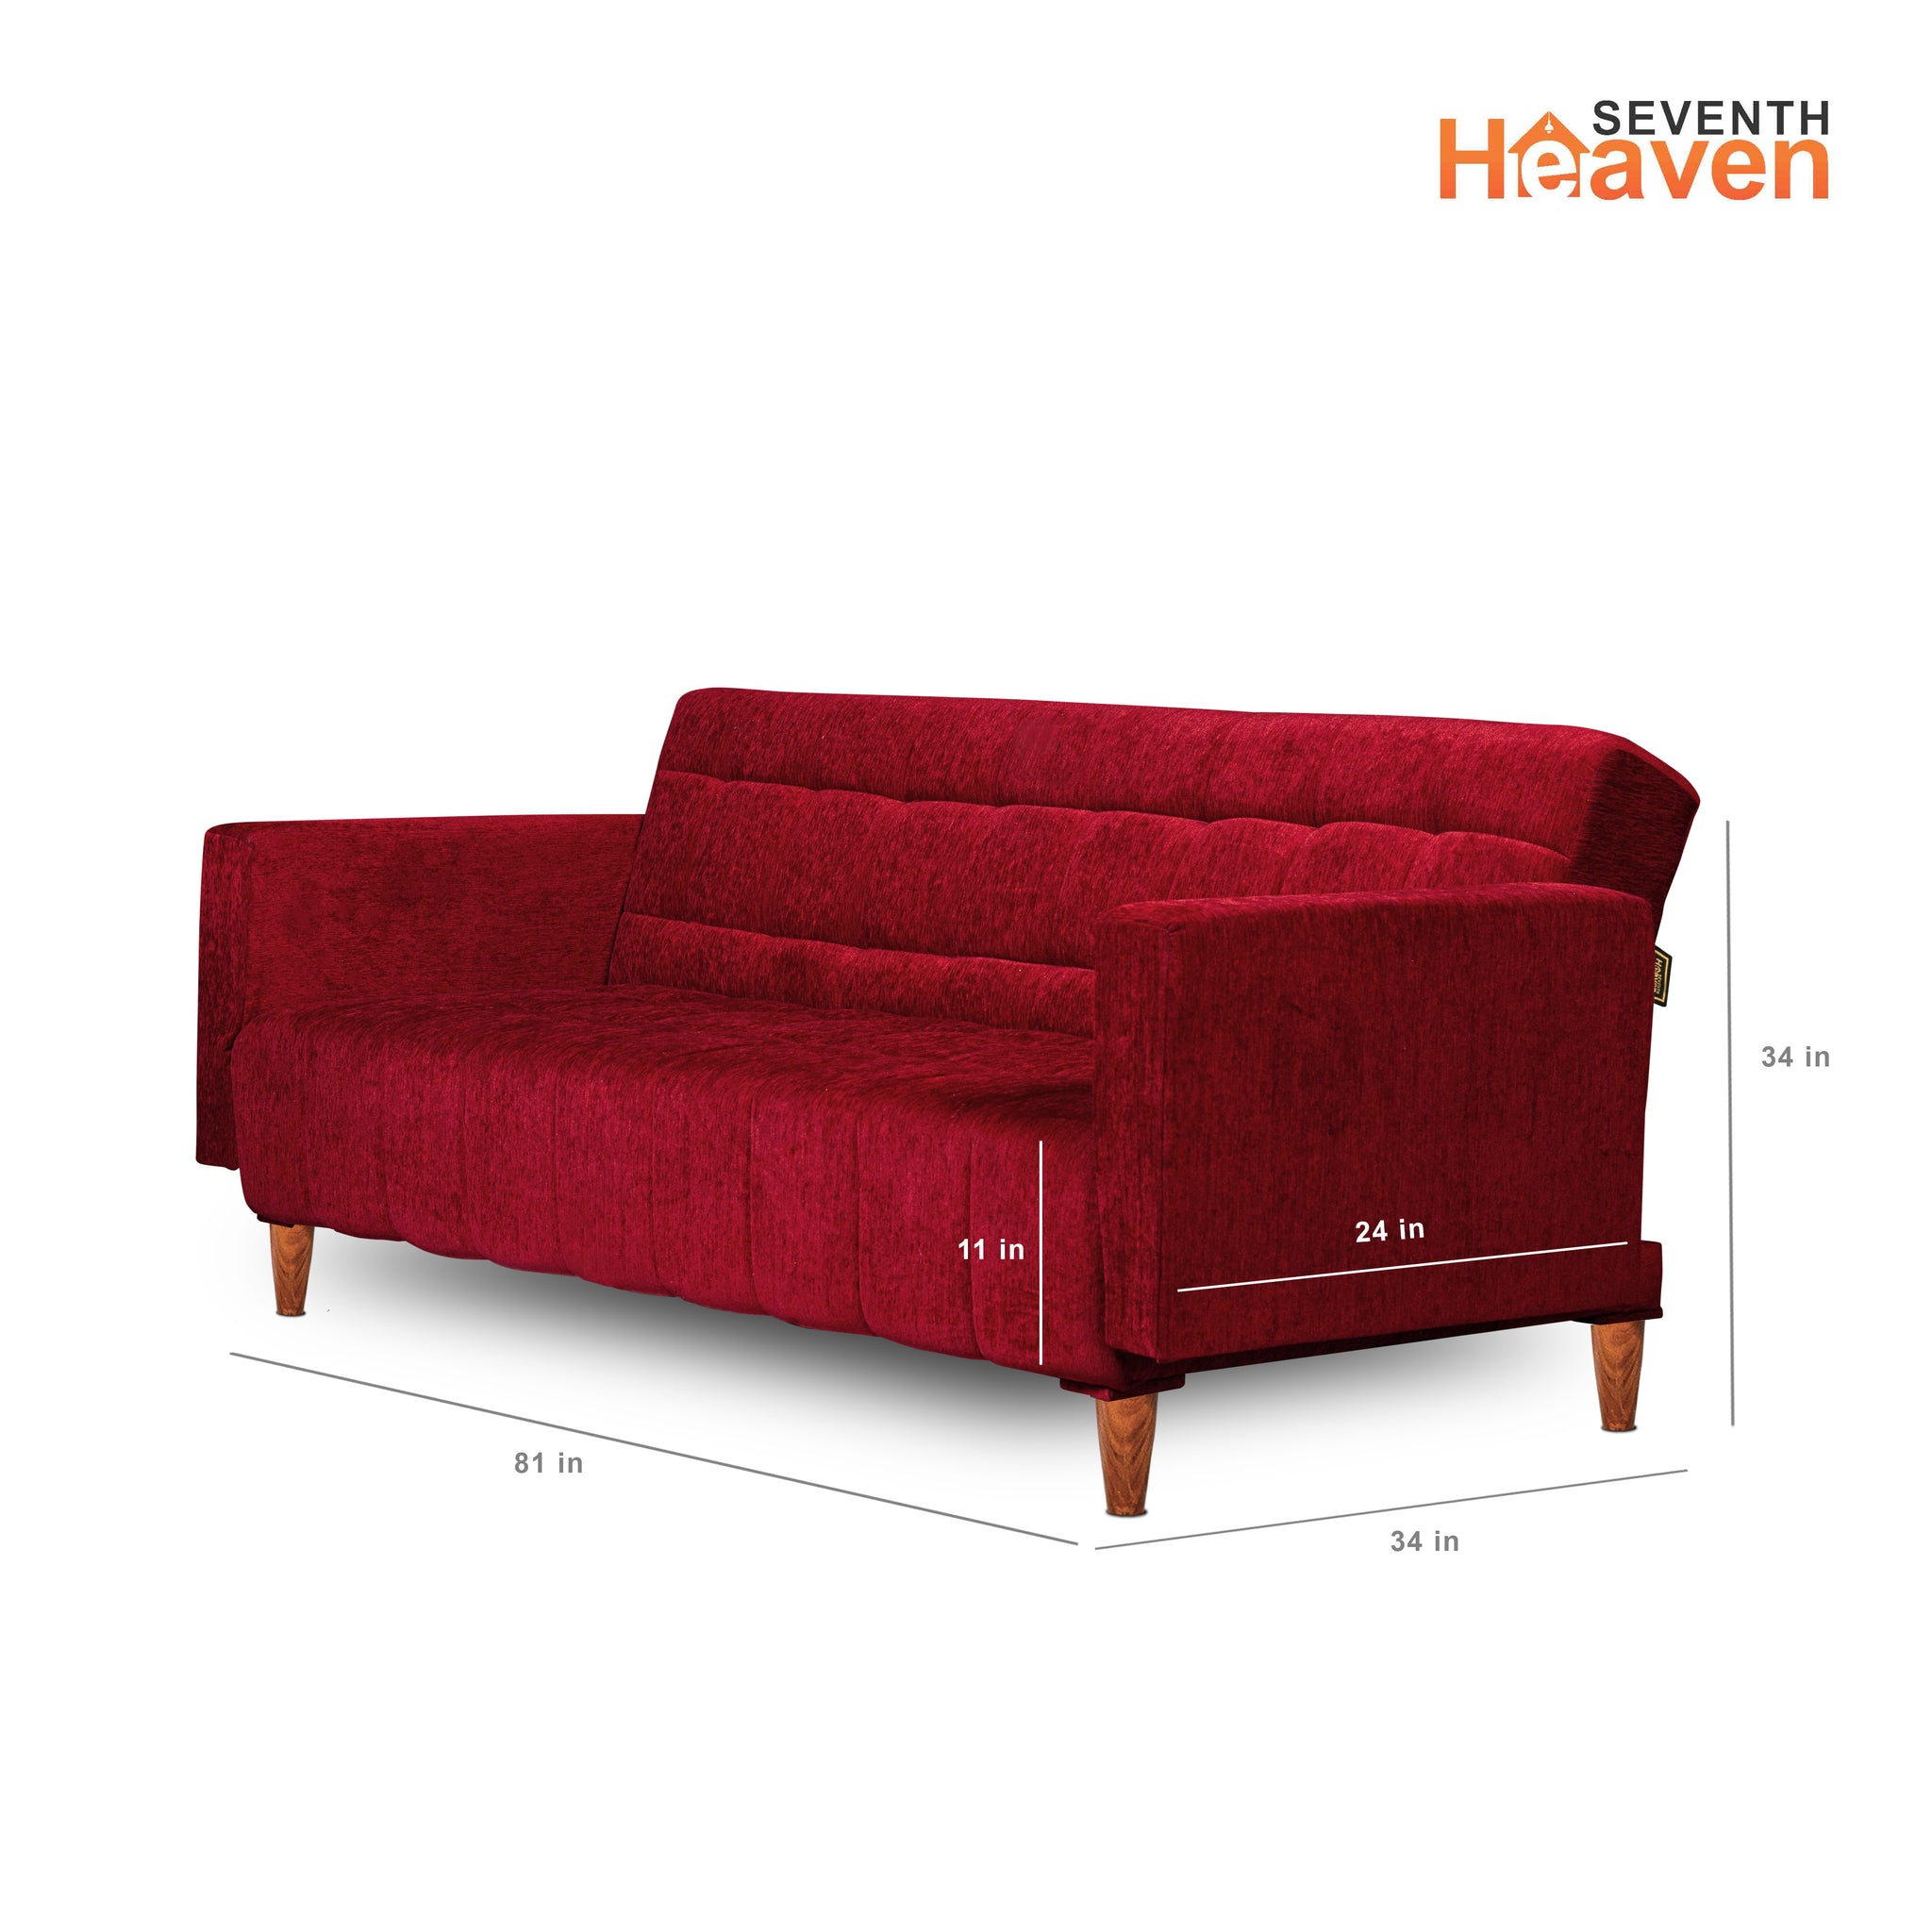 Seventh Heaven Lisbon 4 Seater Wooden Sofa Cum Bed with Armrest. Modern & Elegant Smart Furniture Range for luxurious homes, living rooms and offices. Use as a sofa, lounger or bed with removable armrest. Perfect for guests. Molphino fabric with sheesham polished wooden legs. Maroon colour.